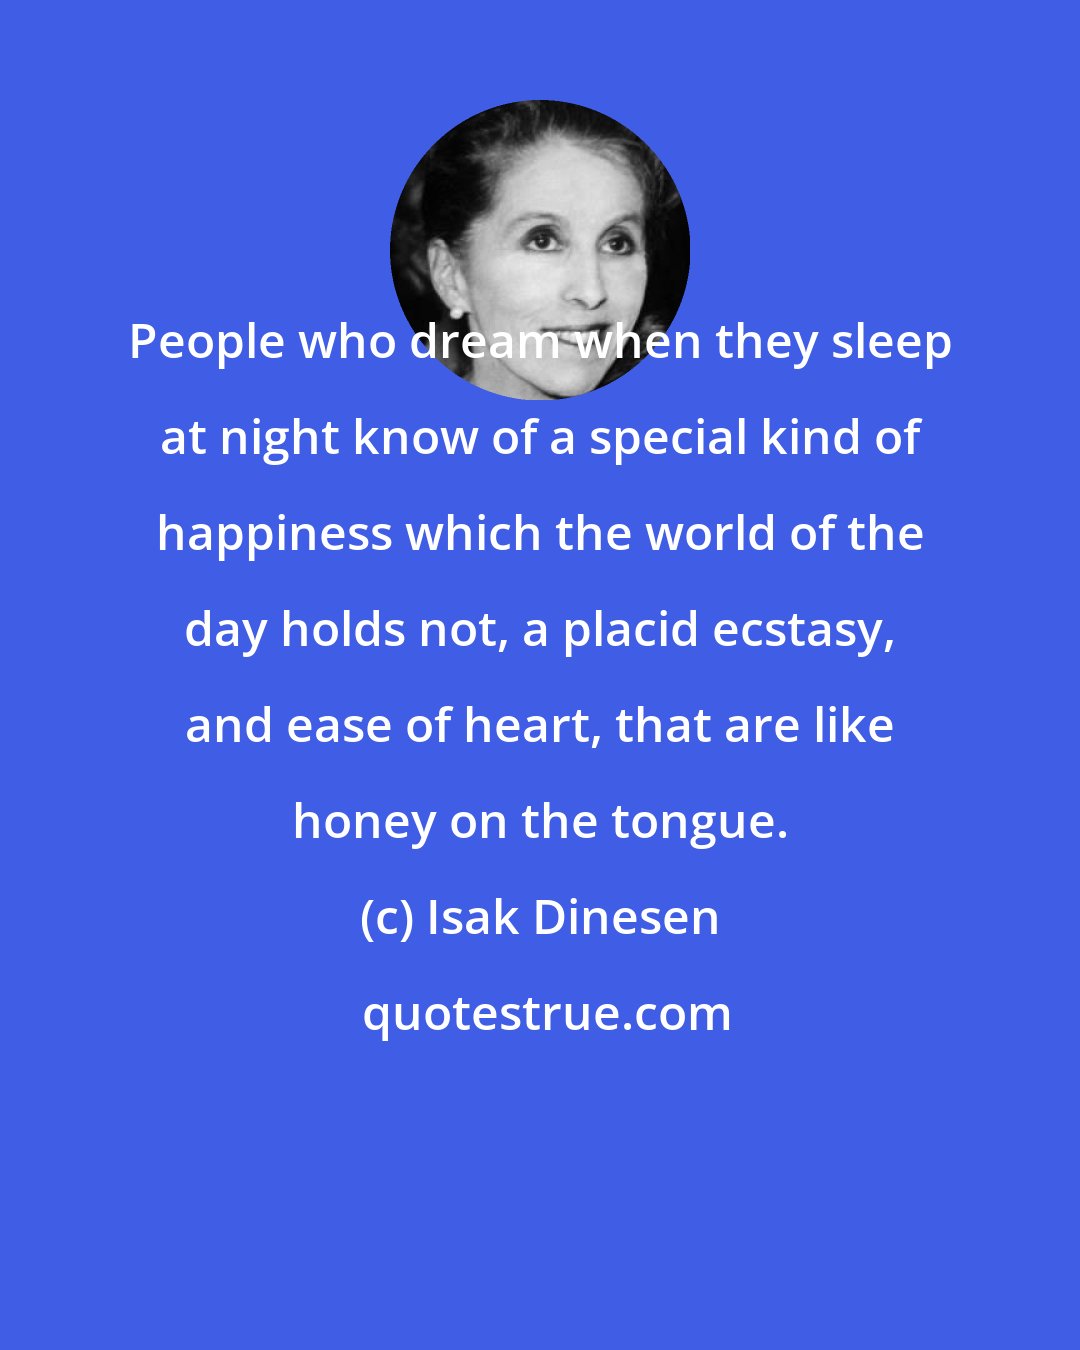 Isak Dinesen: People who dream when they sleep at night know of a special kind of happiness which the world of the day holds not, a placid ecstasy, and ease of heart, that are like honey on the tongue.